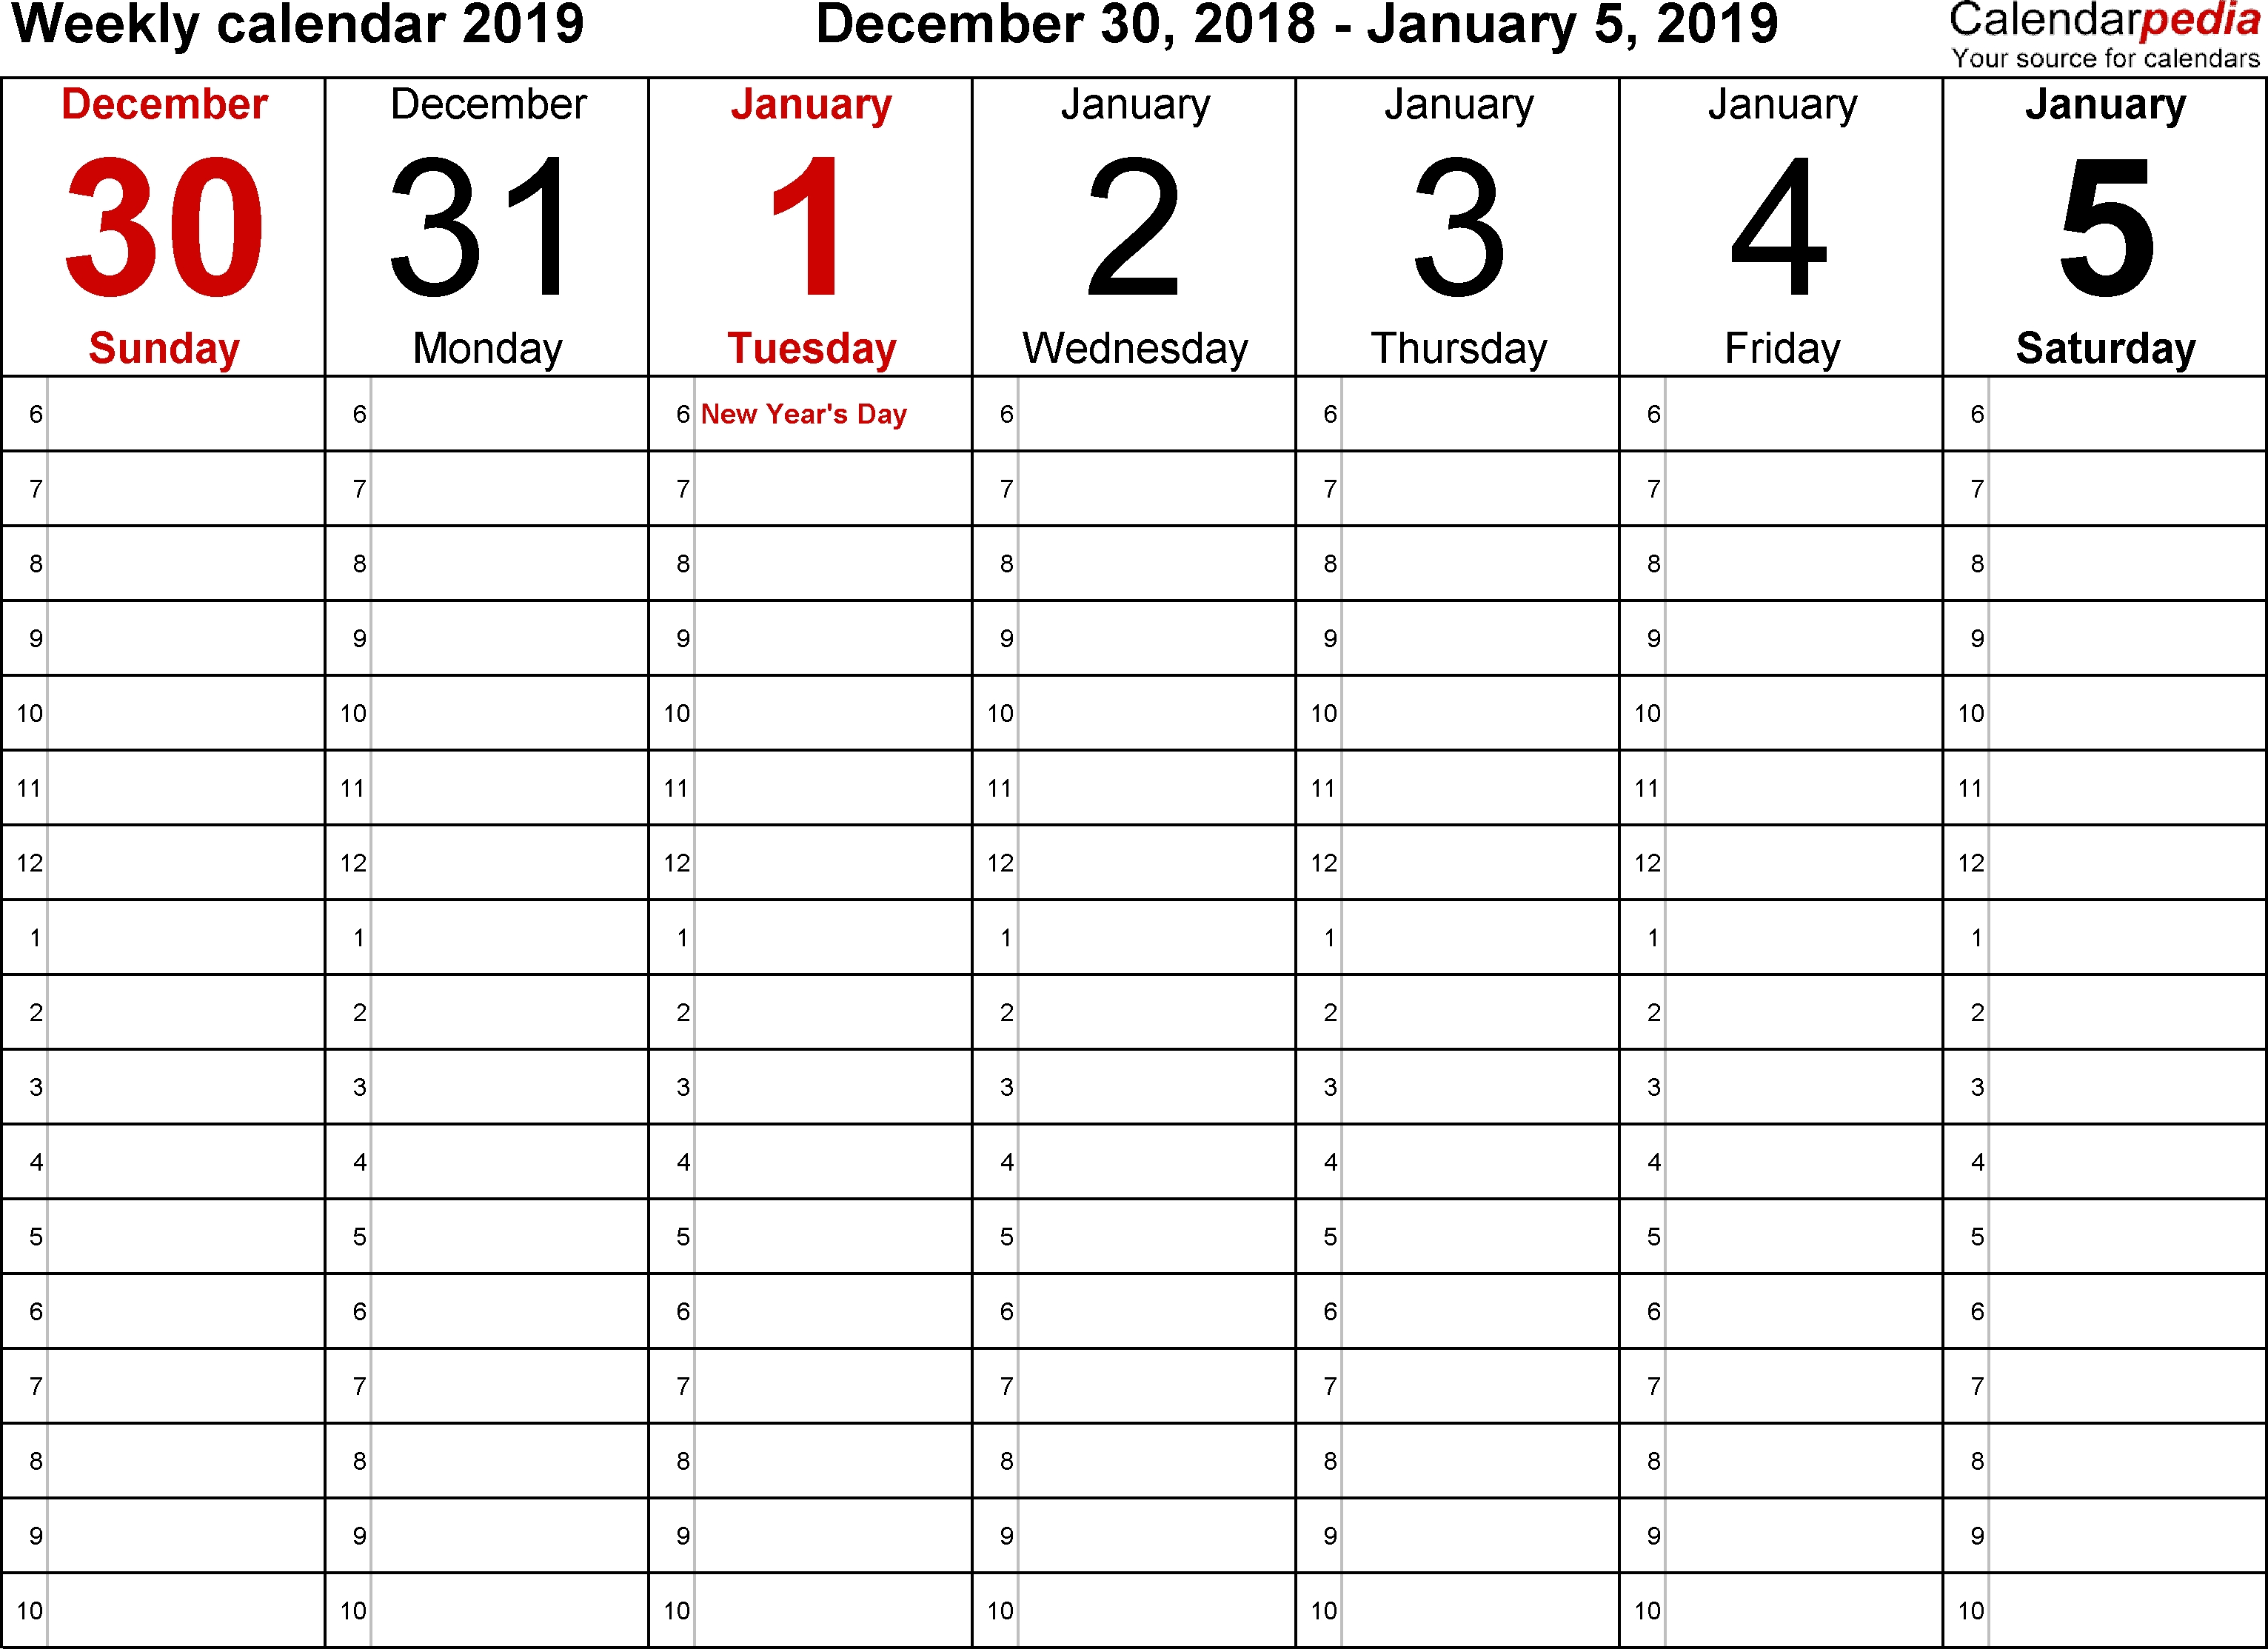 Weekly Calendar 2019 For Word - 12 Free Printable Templates with regard to Free Printable Weekly Calendar Templates